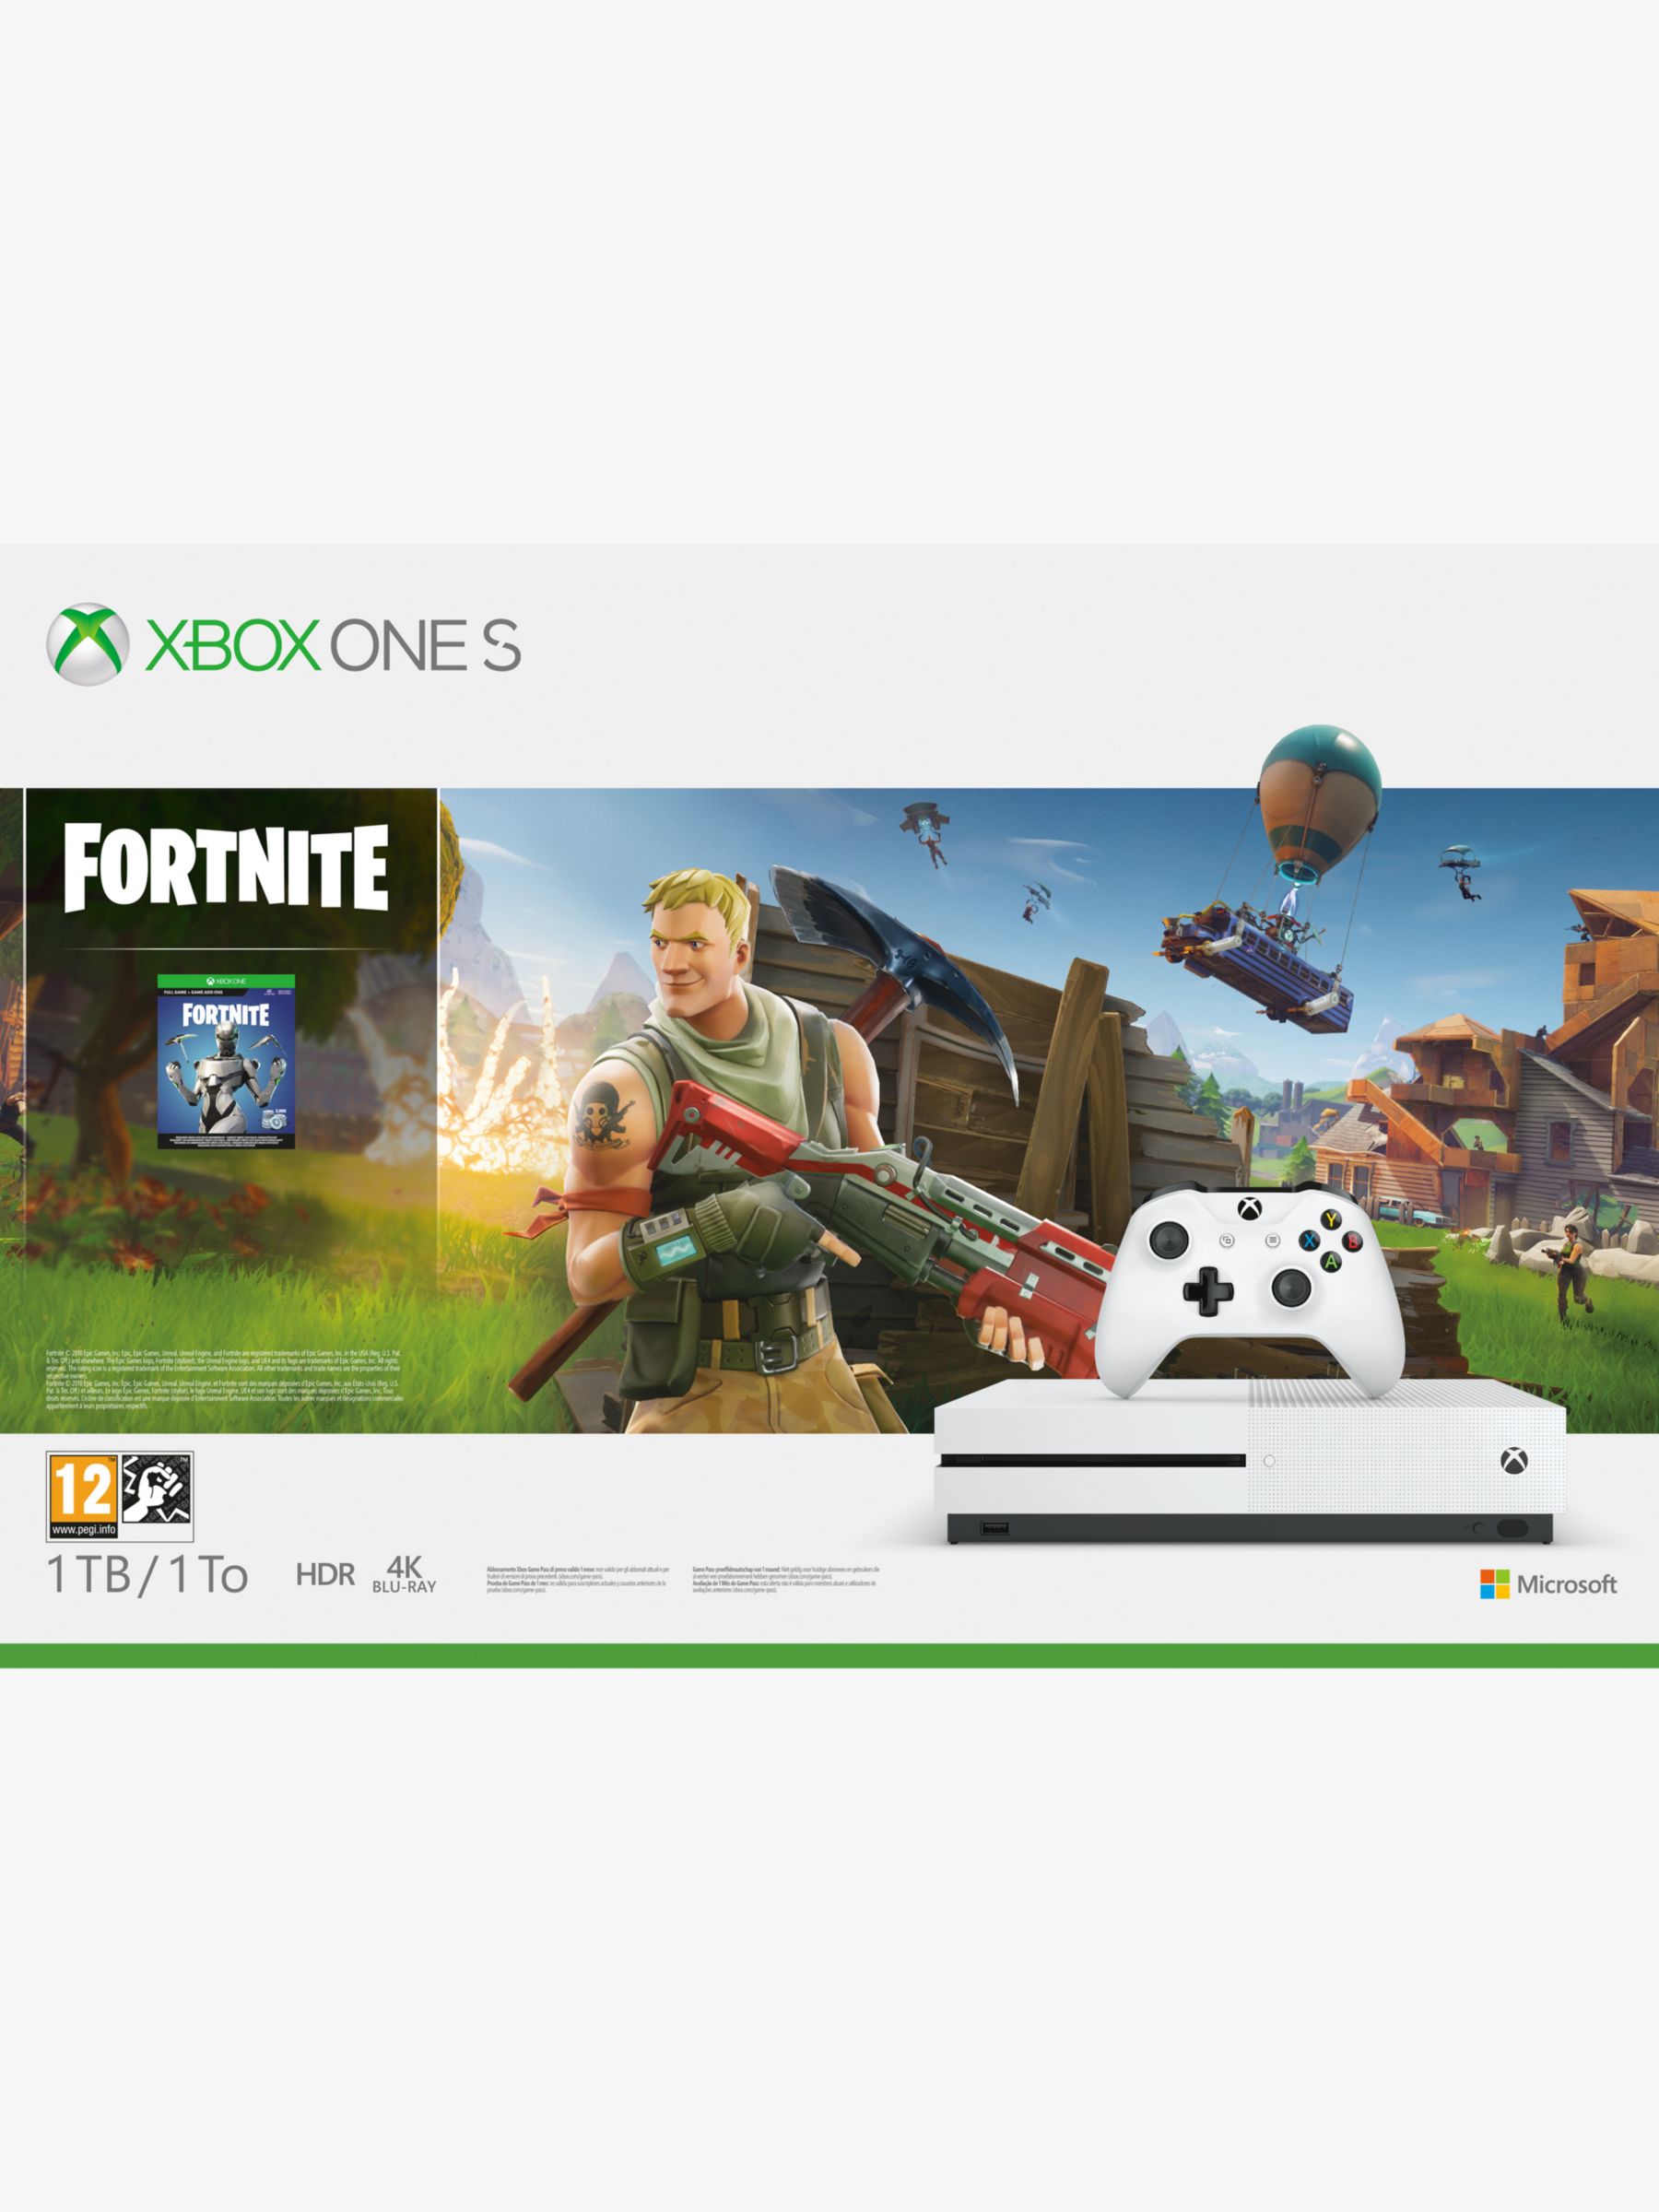 buymicrosoft xbox one s console 1tb with wireless controller and fortnite game bundle online - fortnite free korean skin xbox one